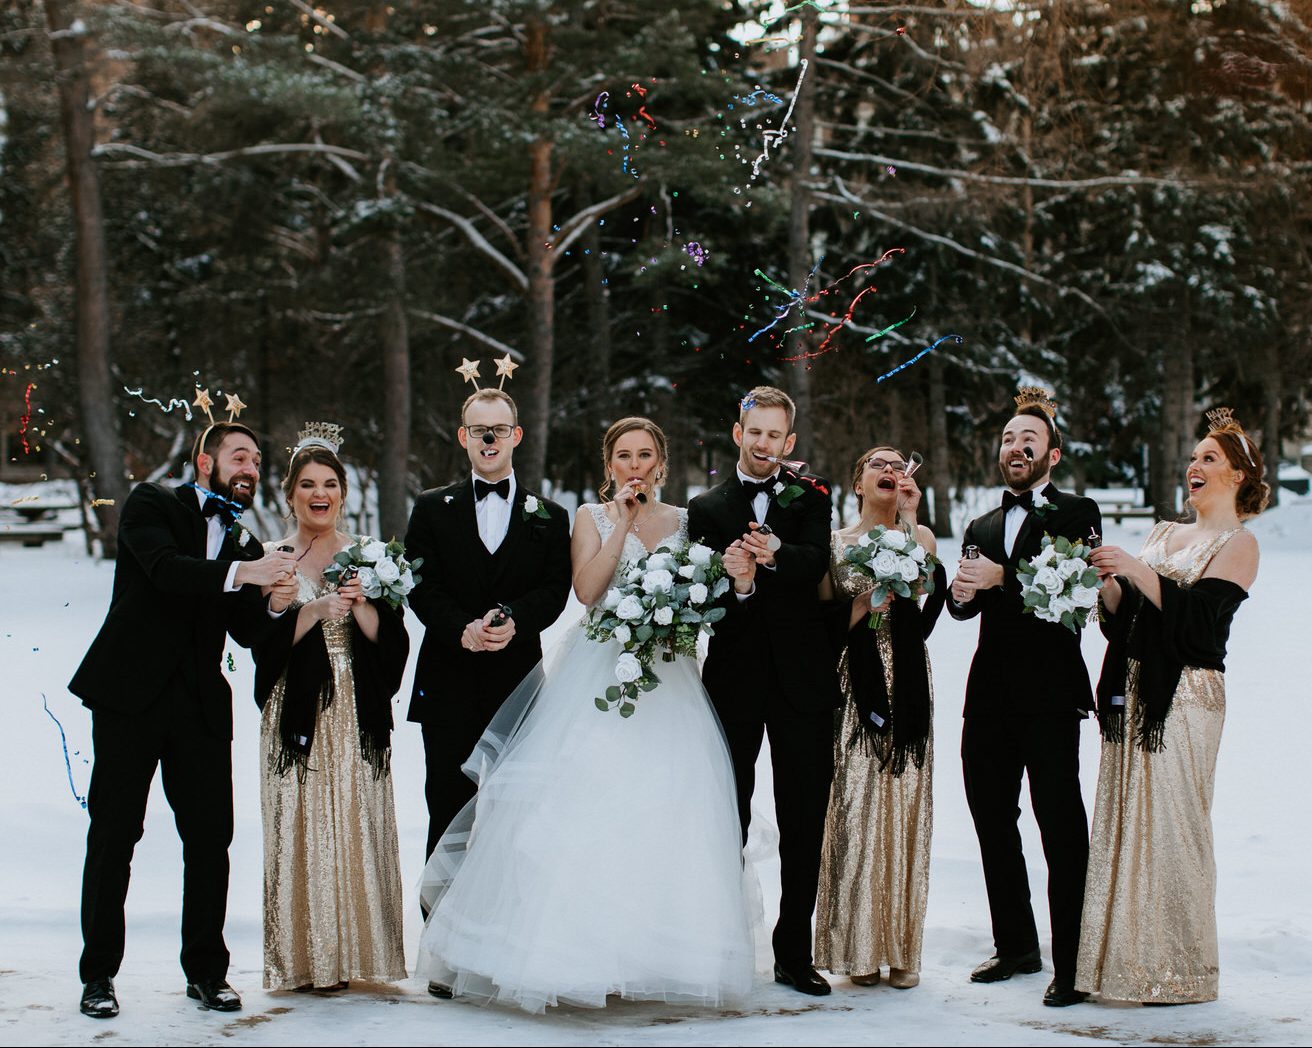 Fun bridal party images on New Years Even Winter Wedding